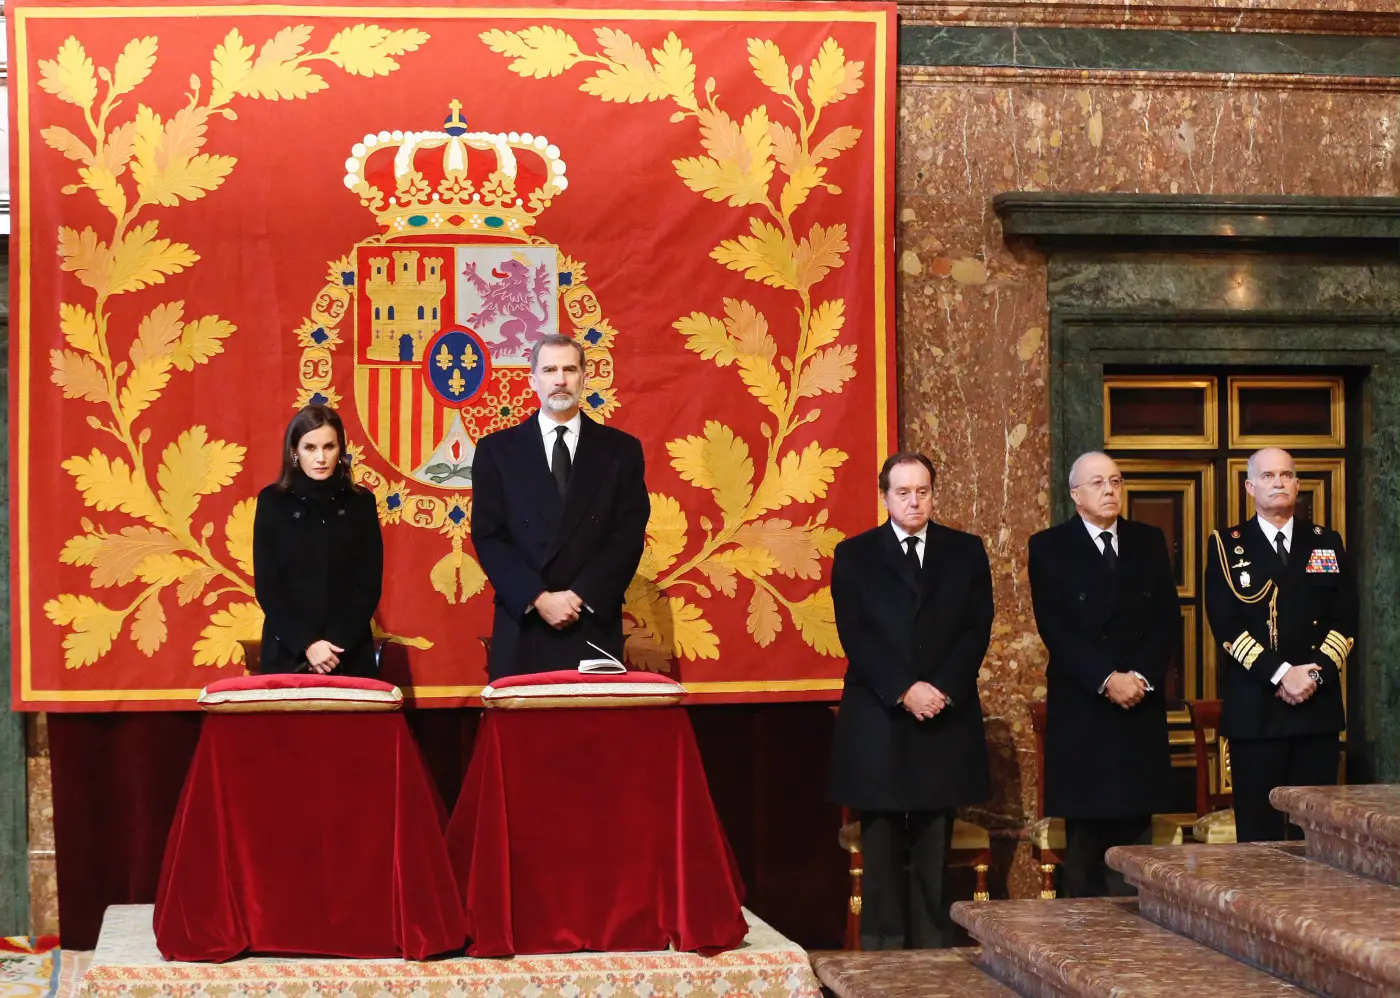 Queen Letizia attended the funeral of Infanta Pilar